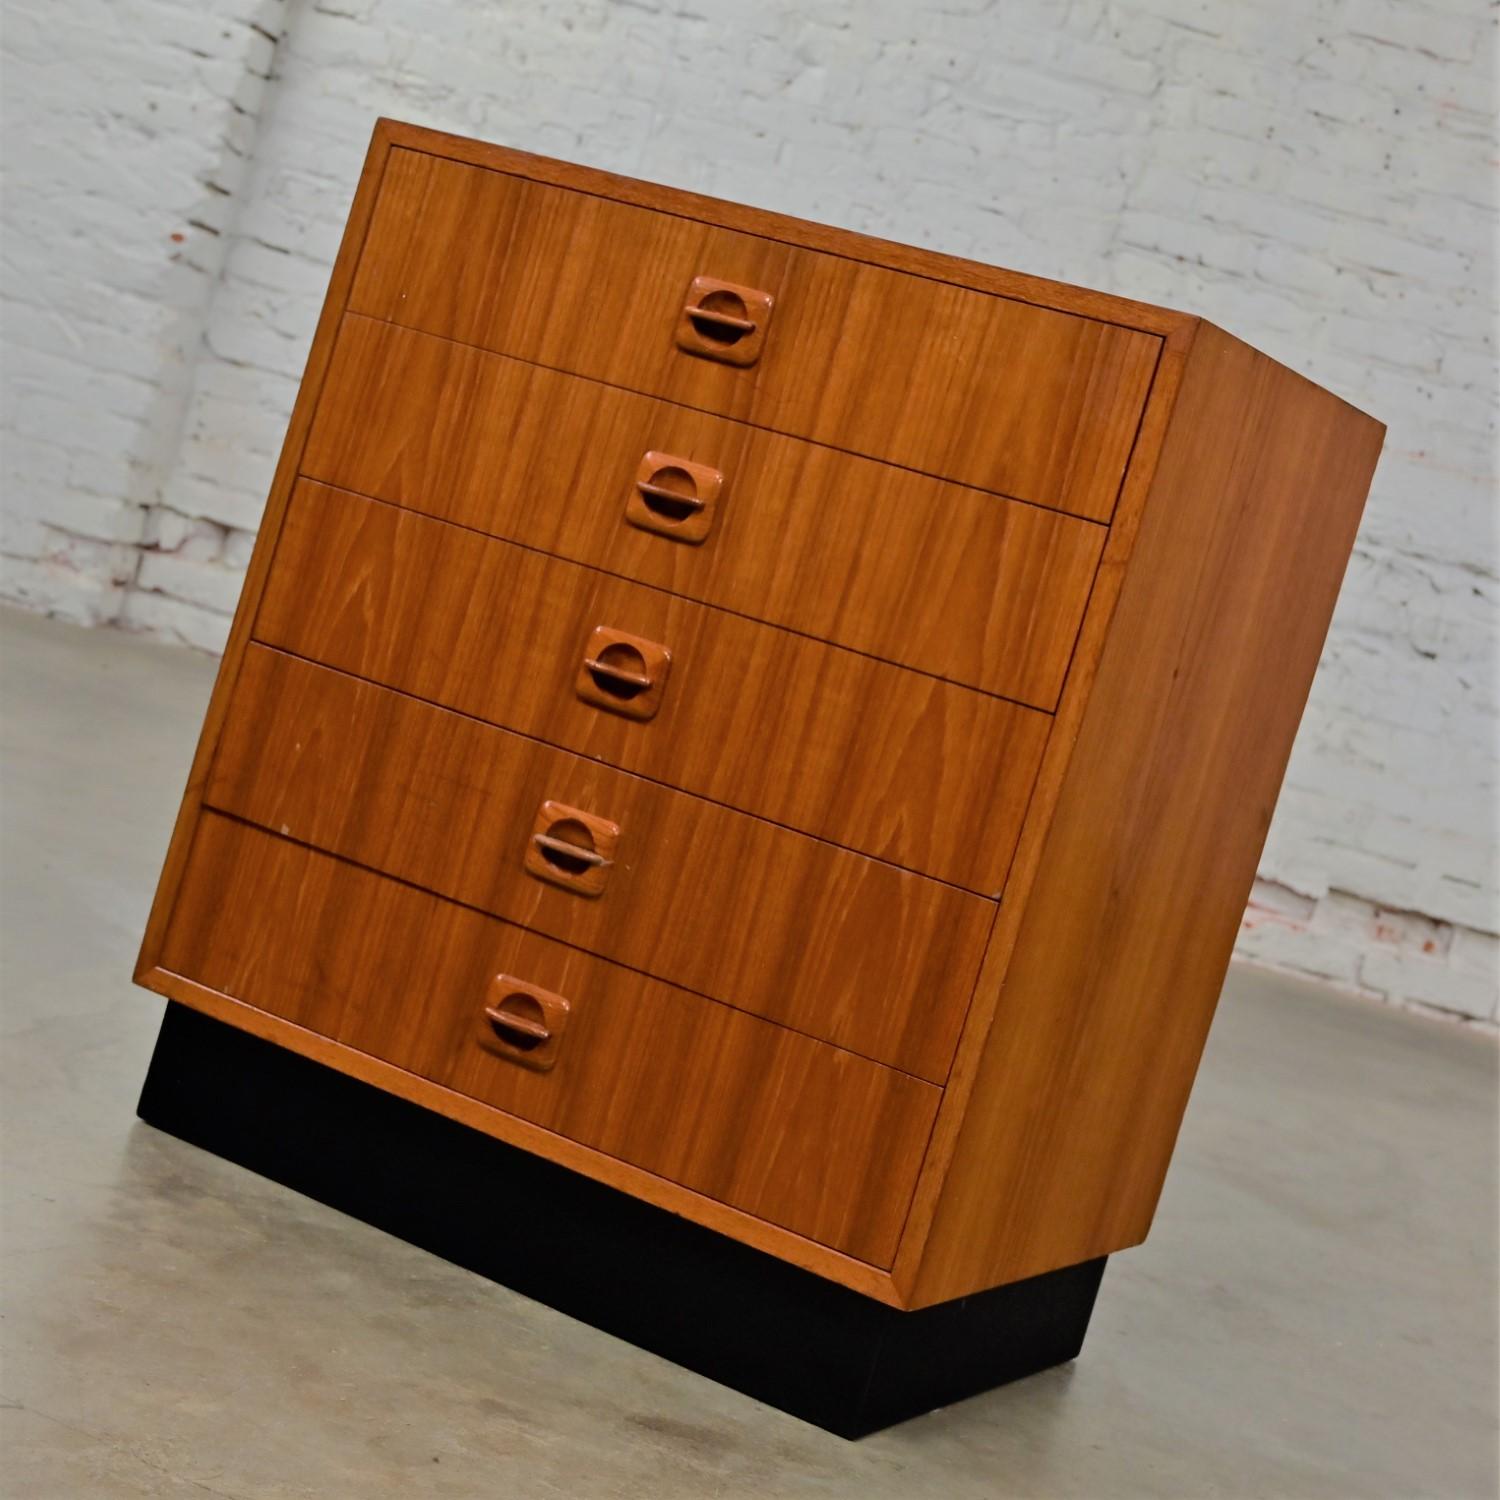 Mid to Late 20th Century Scandinavian Modern Small Teak Cabinet 5 Drawers  In Good Condition For Sale In Topeka, KS